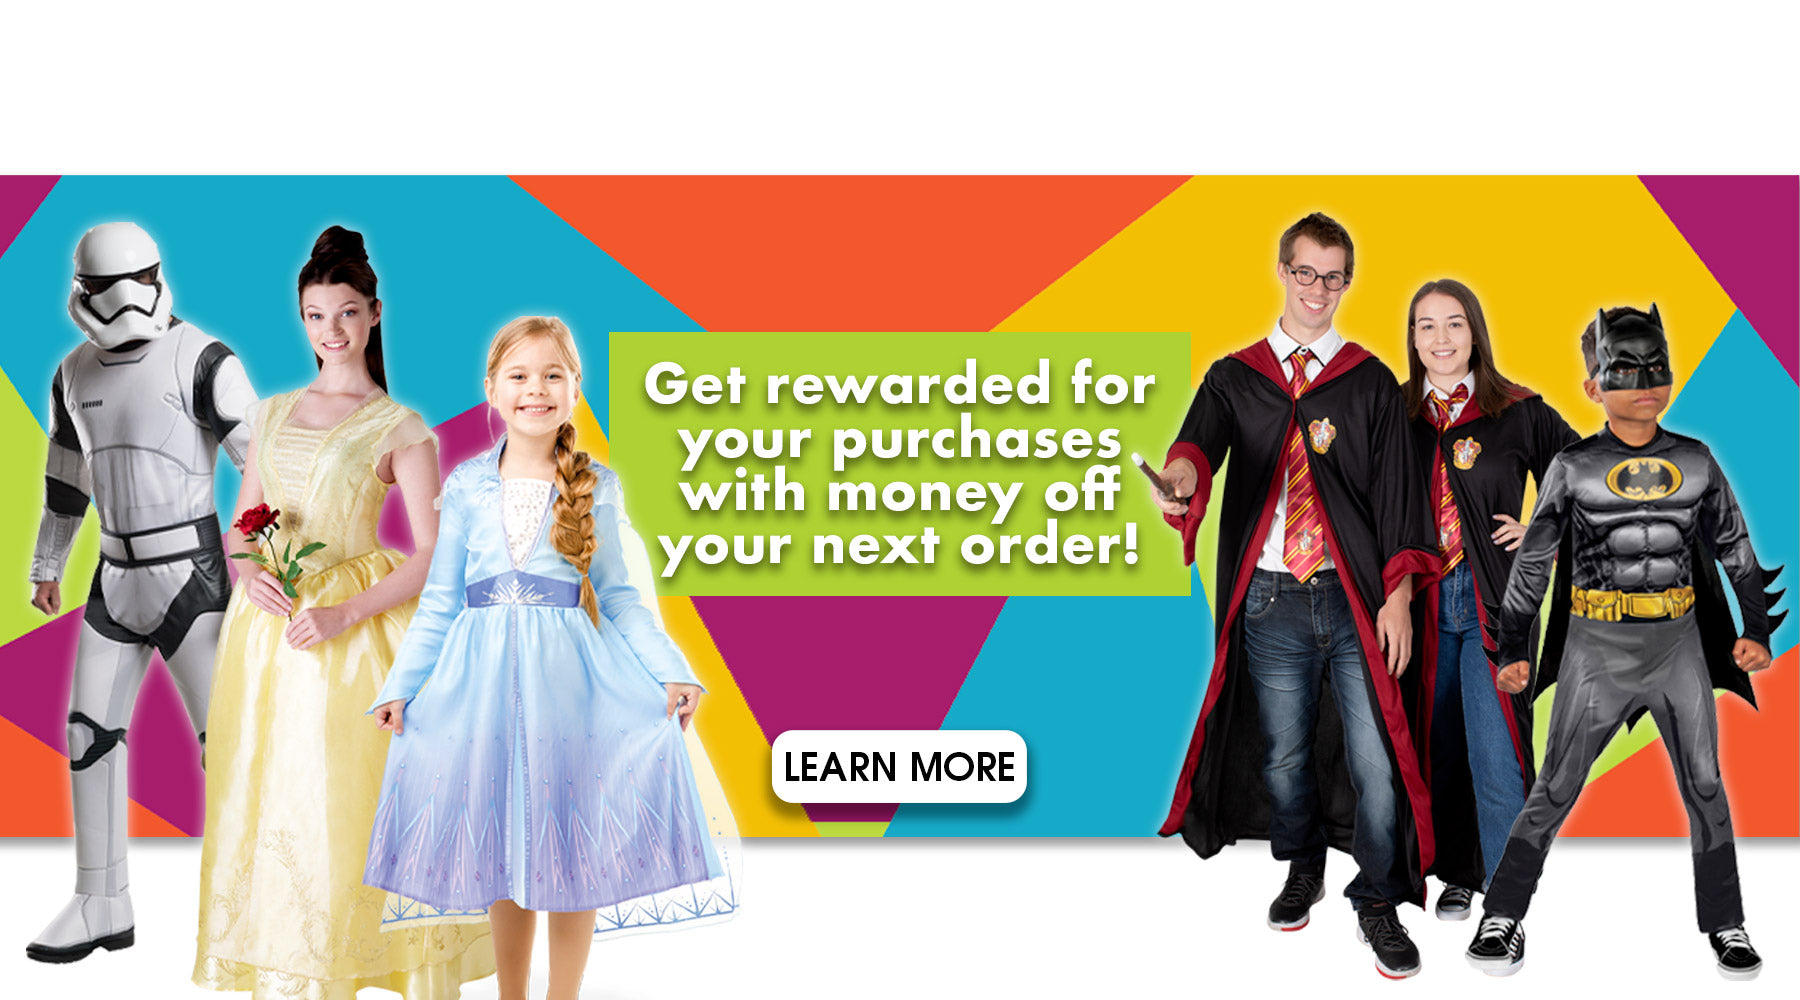 Get rewarded for every purchase $69 and over at Costume Super Centre Australia! For all your kids costumes and adult costume needs! Now available NECA collectibles! Orders $69 and over also get FREE Express shipping!